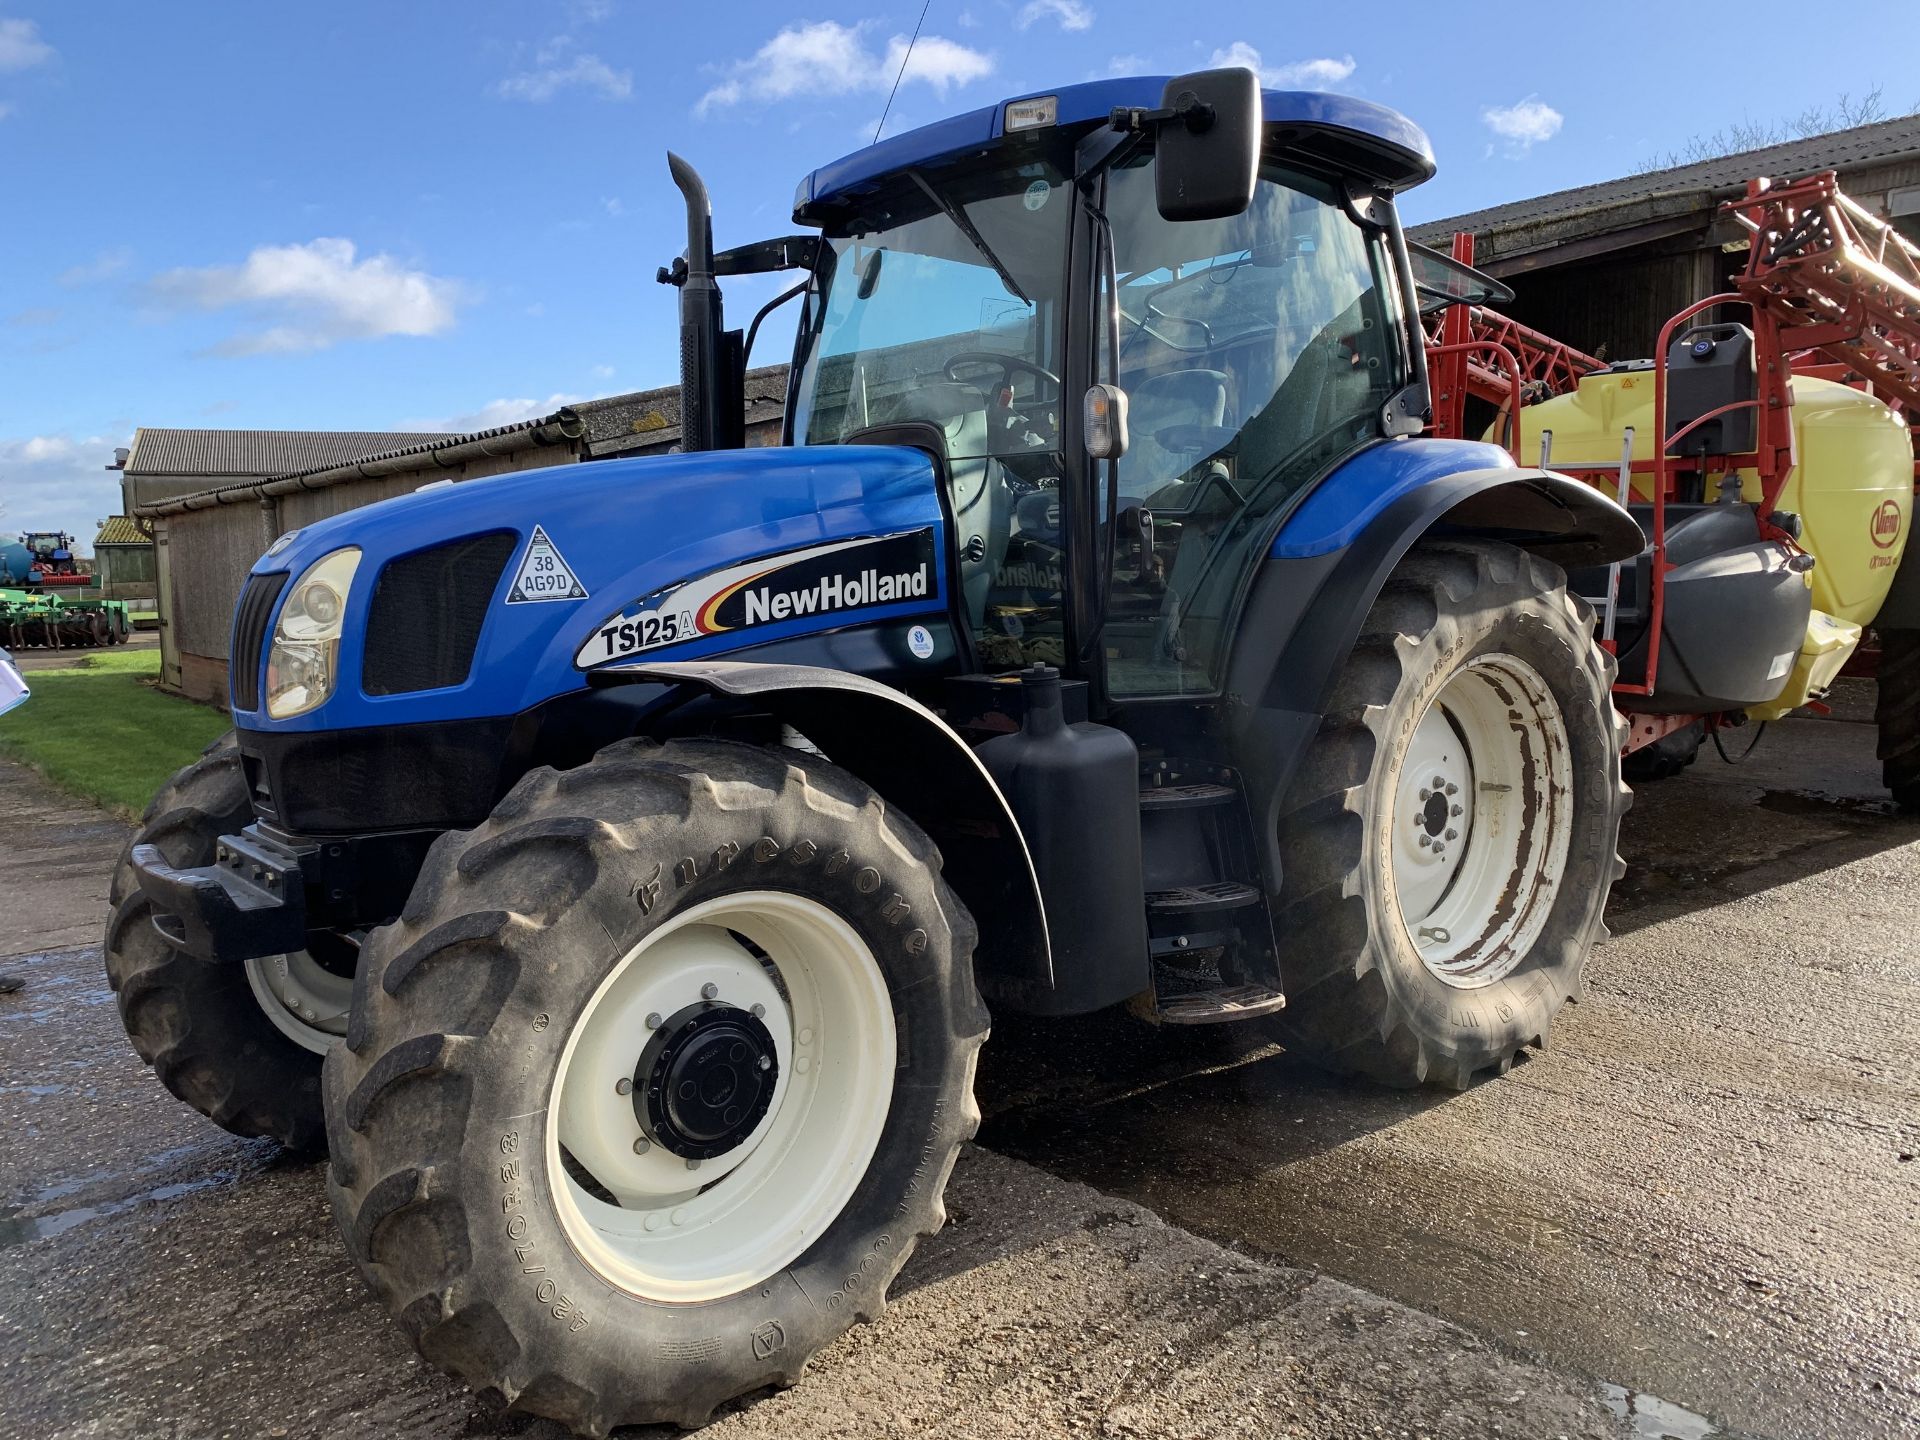 2004 New Holland TS125A tractor YX04 FYU, 5428 hours, 520/70R38 rear and 420/70R28 front tyres with